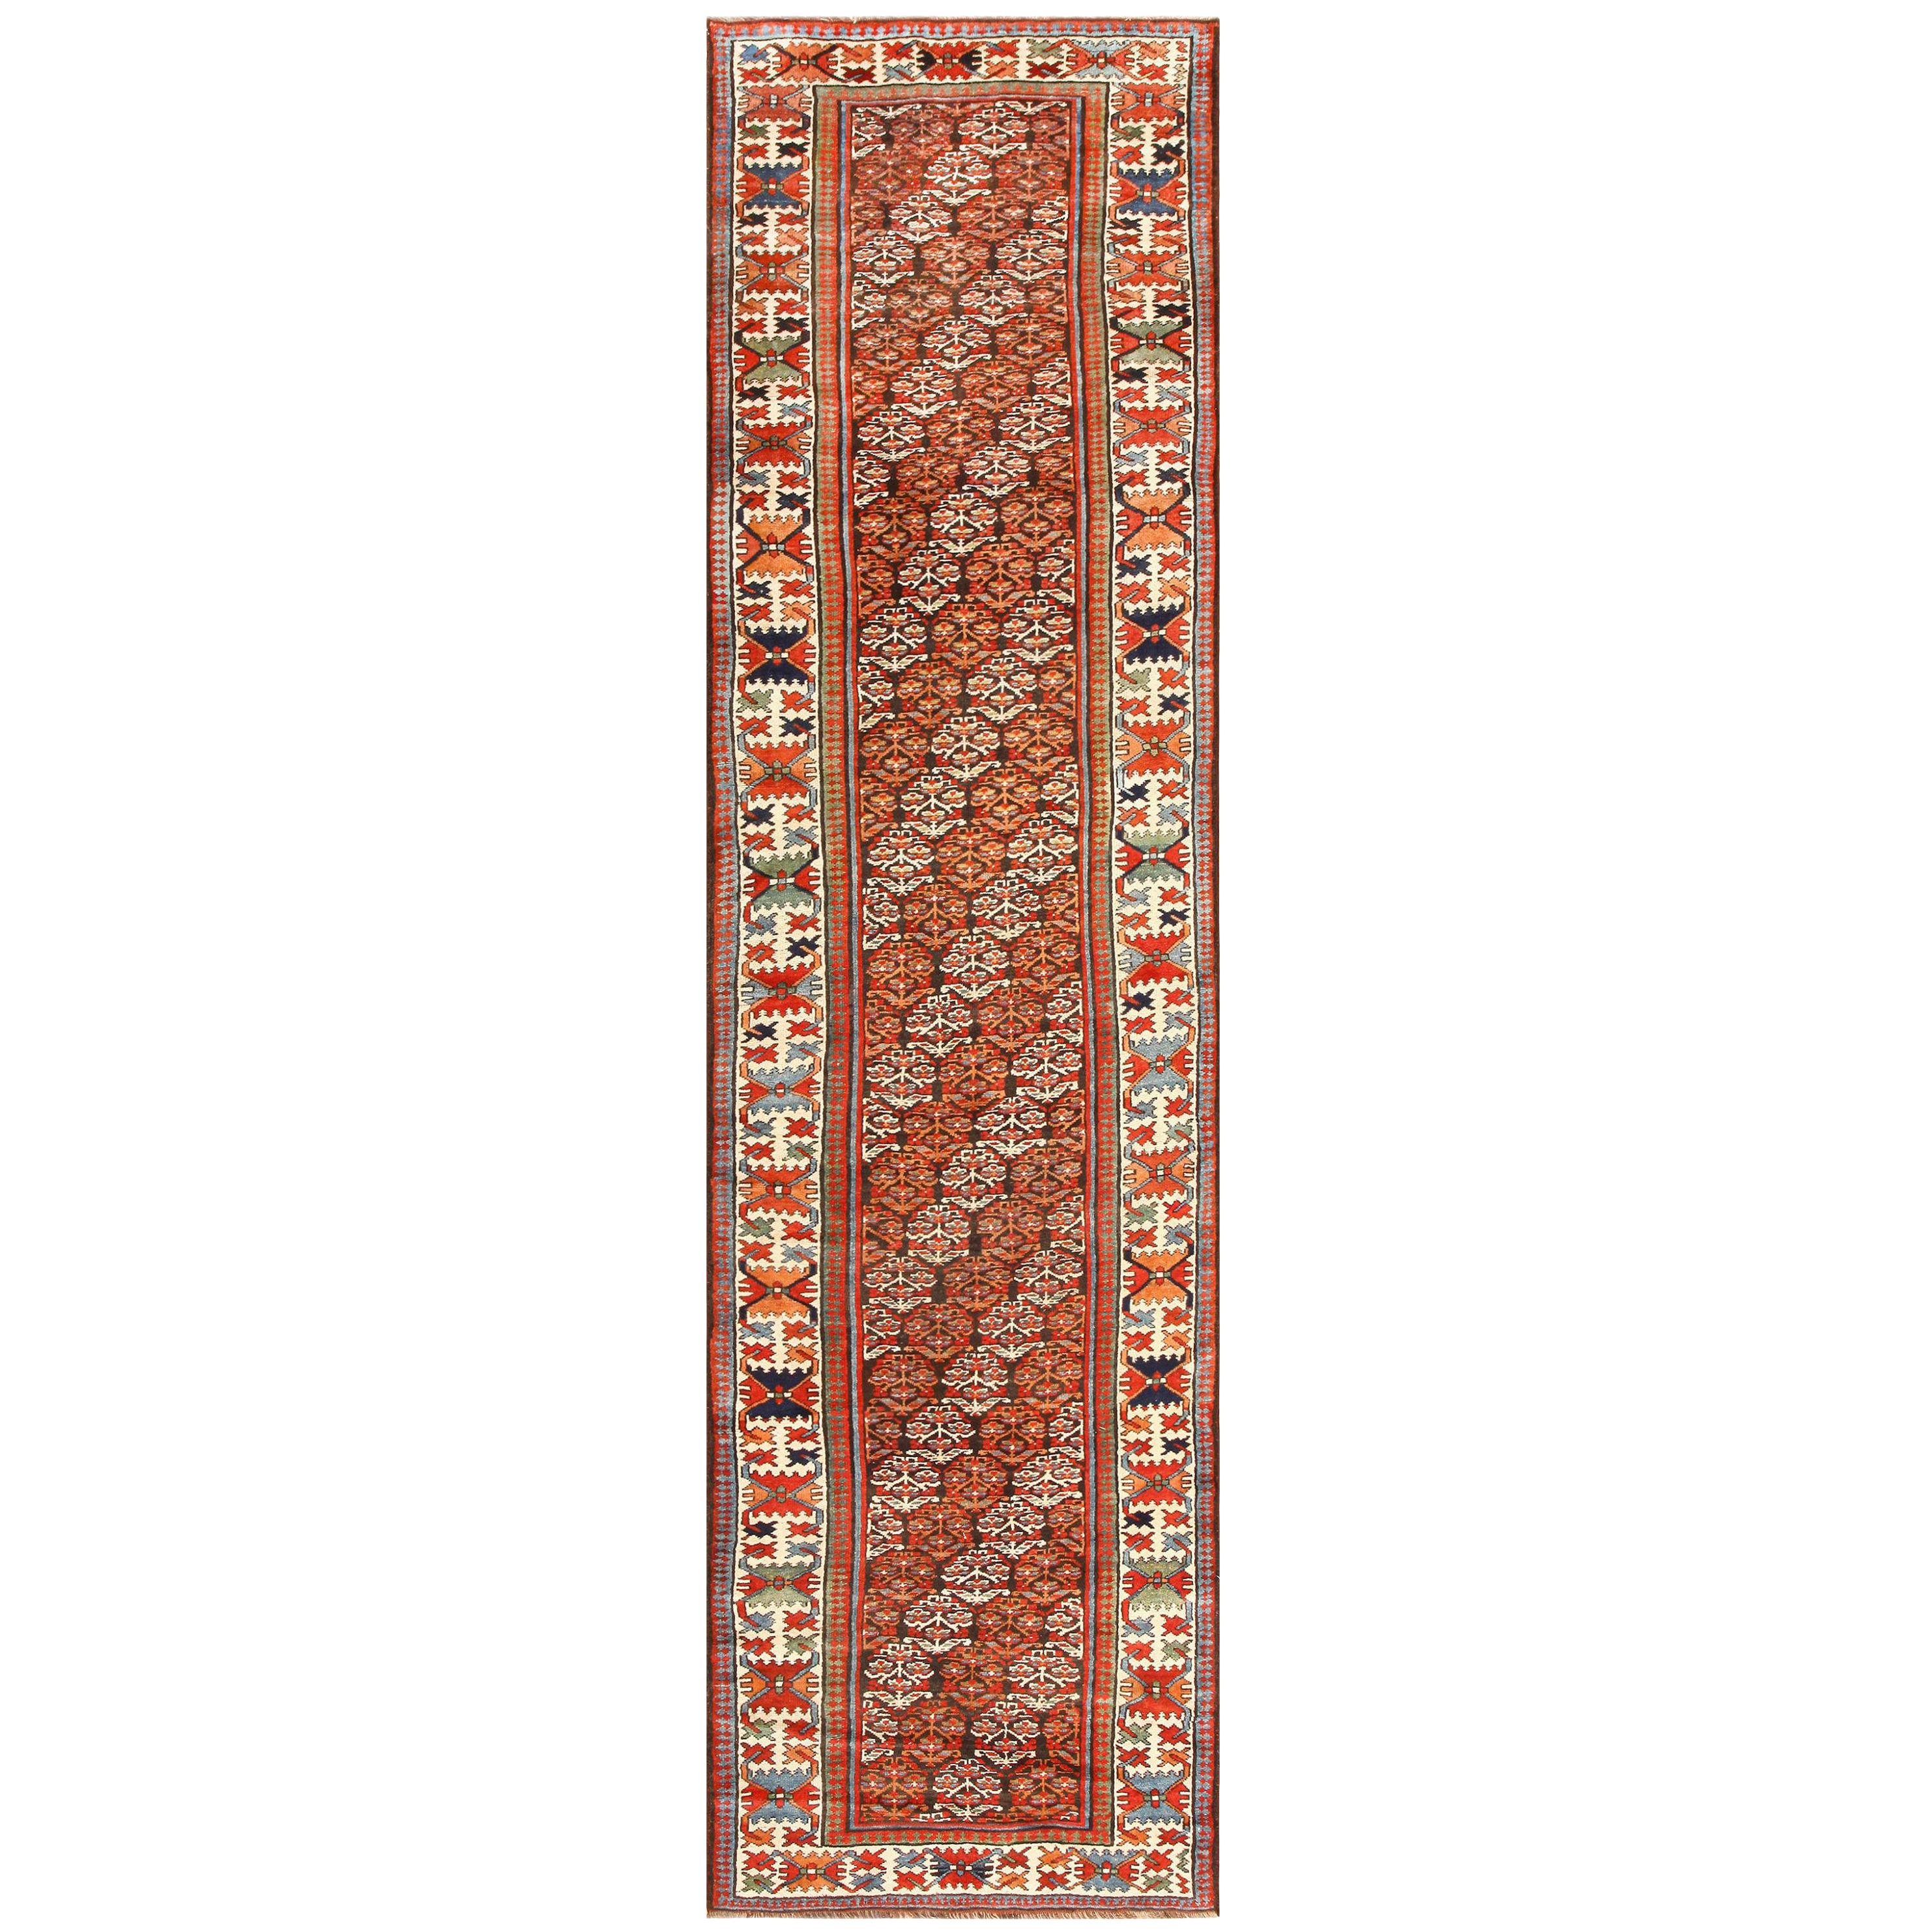 Antique Tribal Northwest Persian Runner. Size: 3 ft 7 in x 13 ft 5 in 